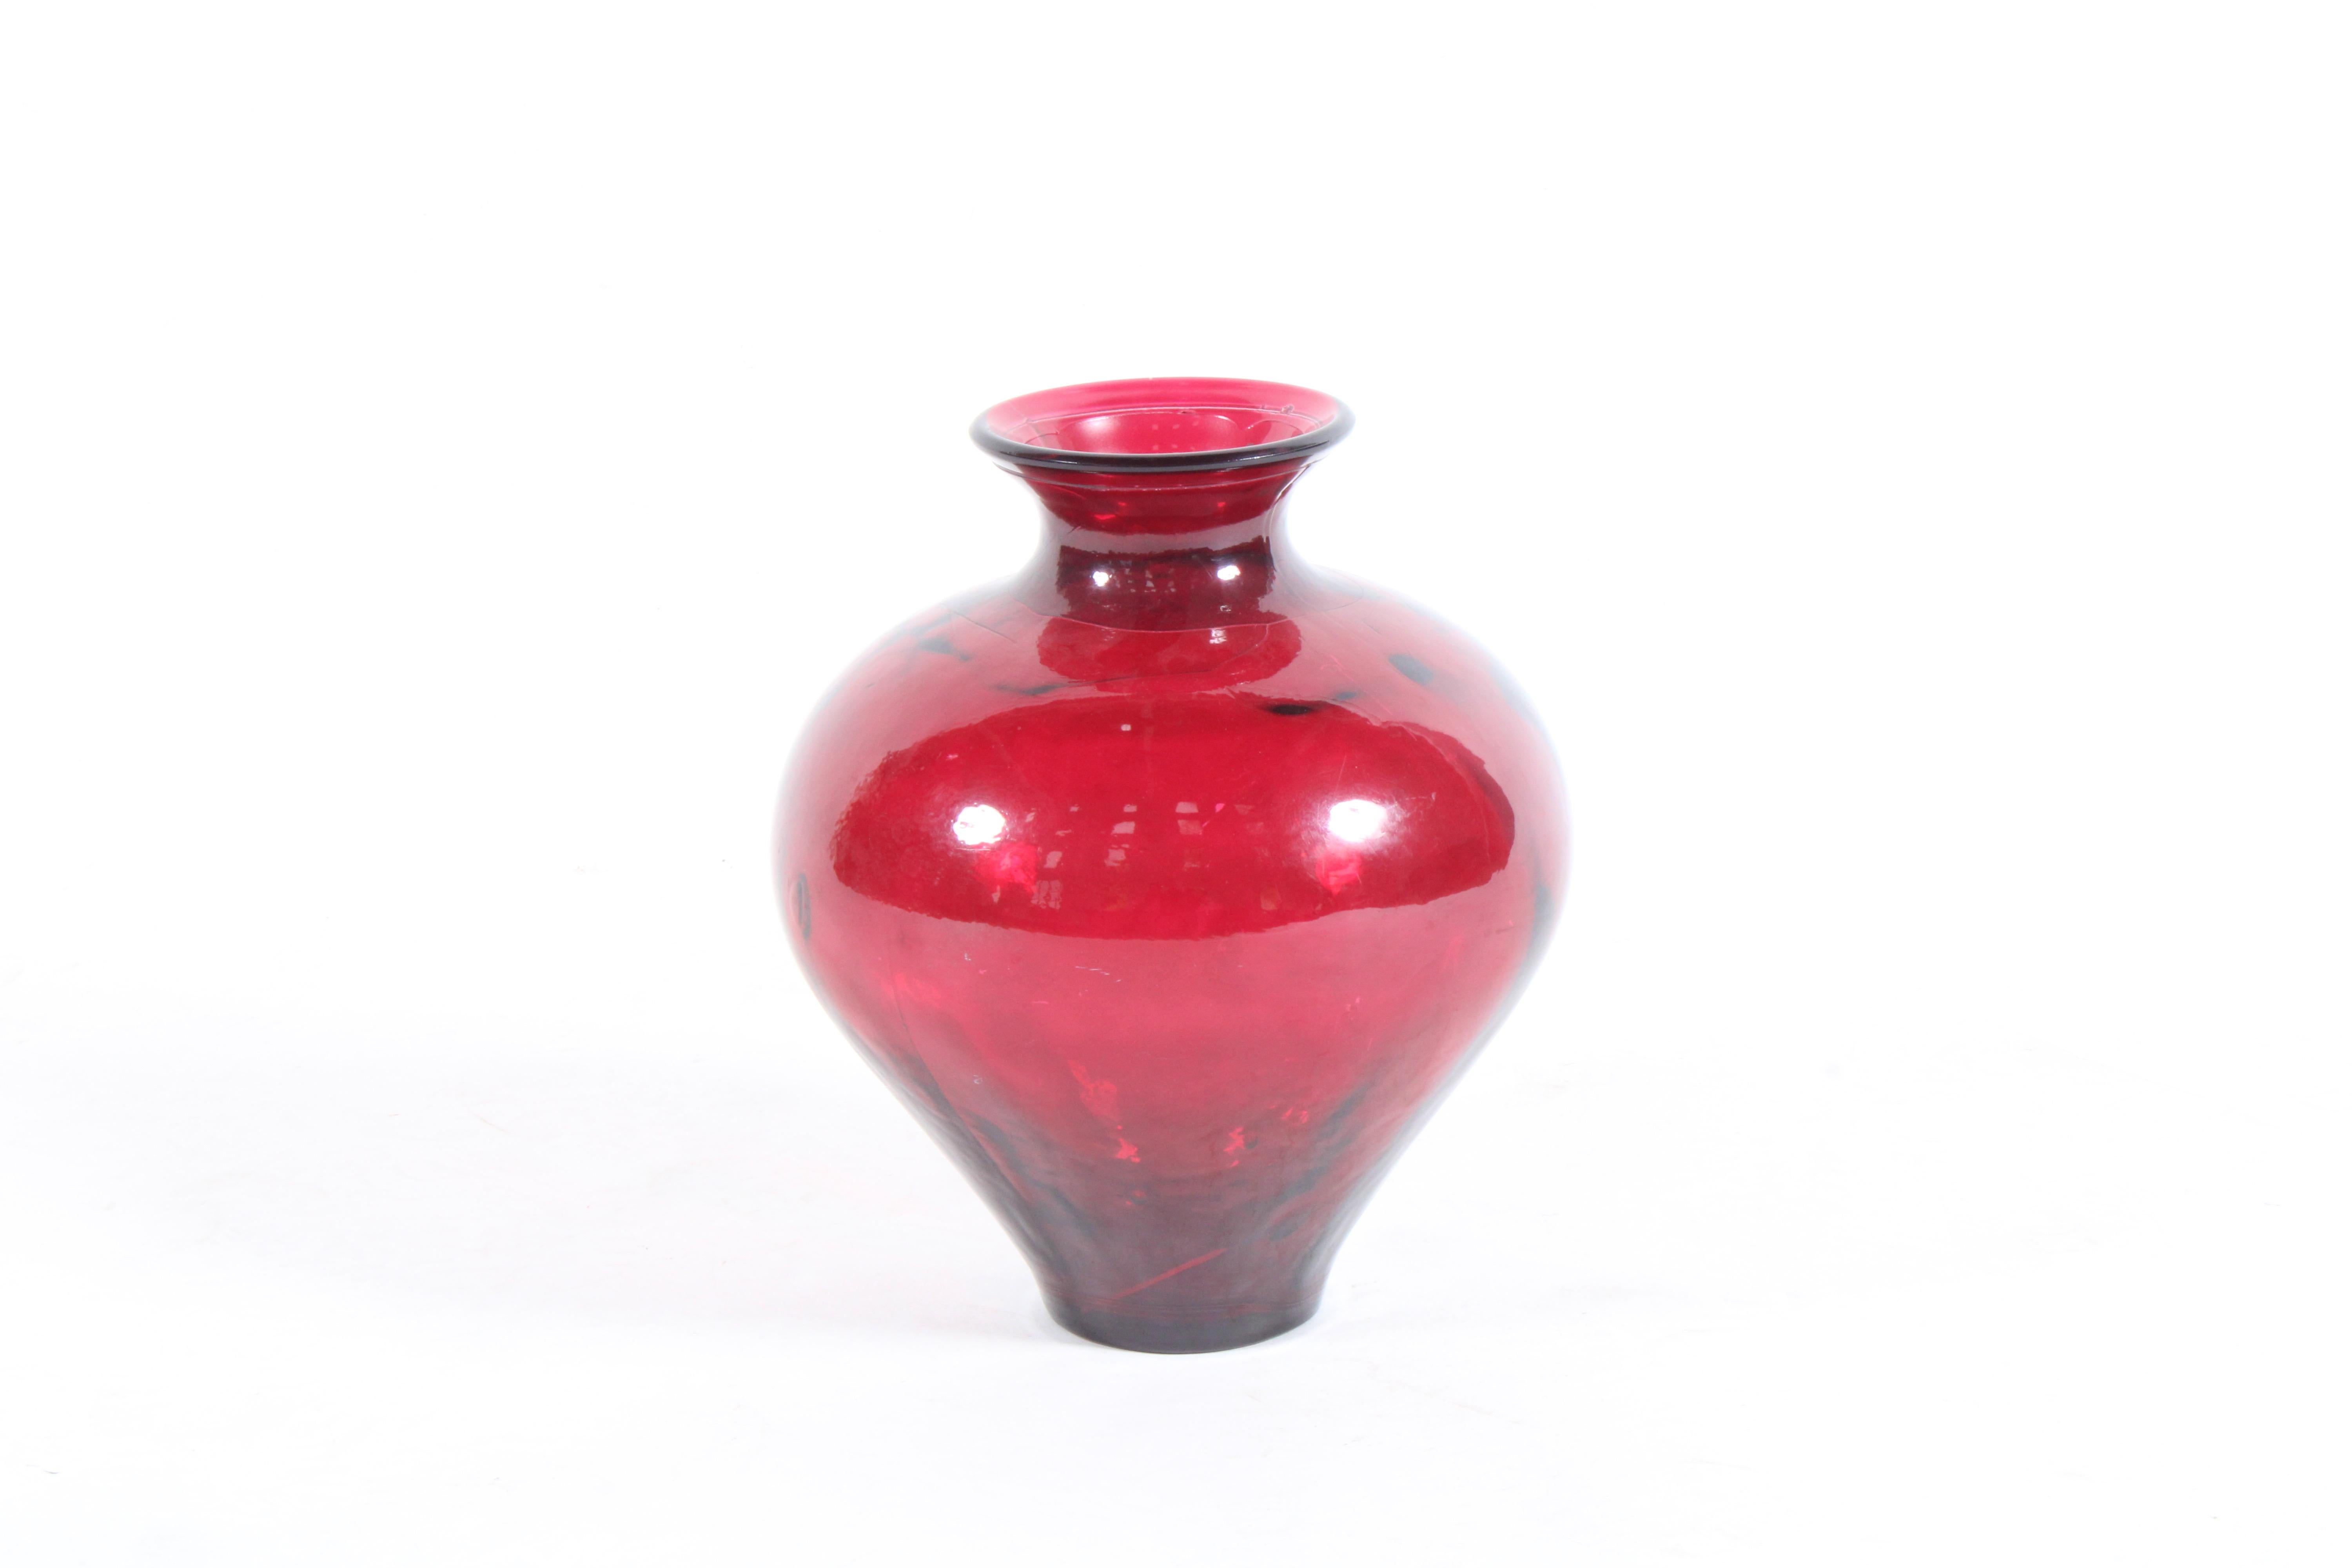 A beautifully proportioned and stylish vintage Ruby red glass vase. The perfect piece of home decor to style you table or sideboard with.